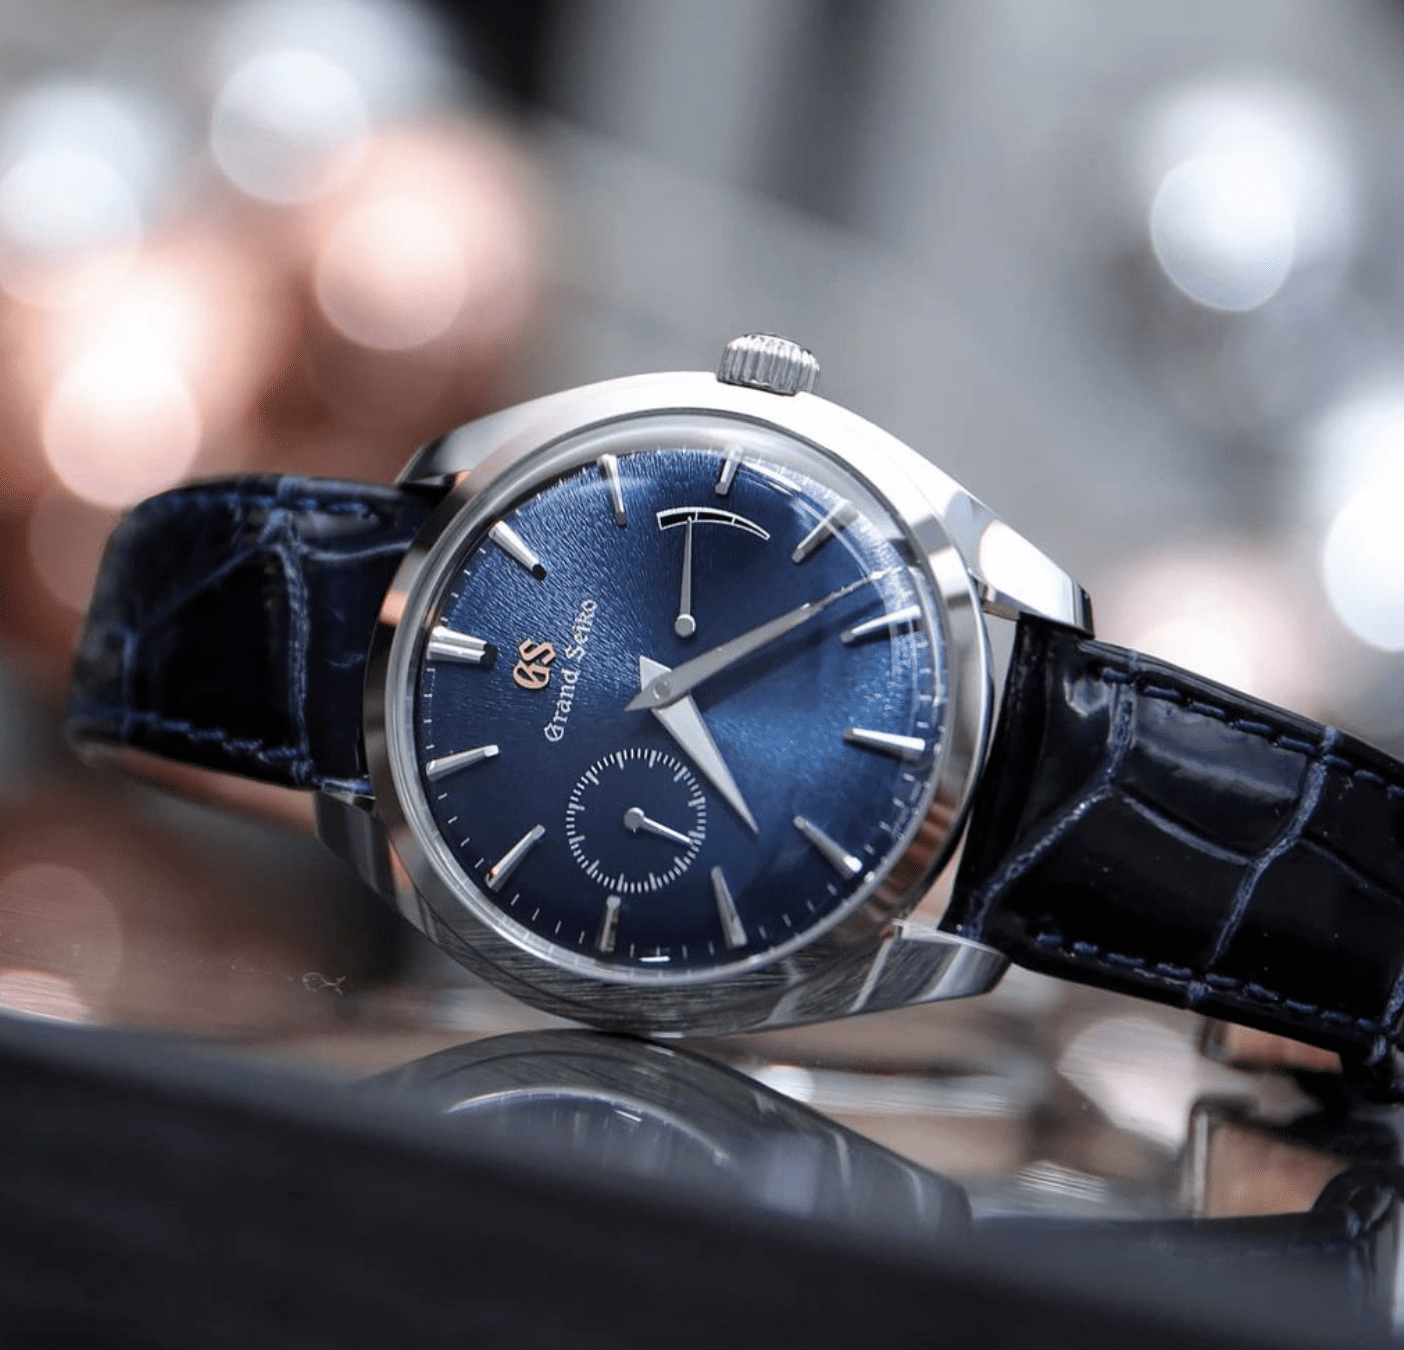 5 of the best Grand Seiko Instagram accounts that you need in your feed -  Time and Tide Watches